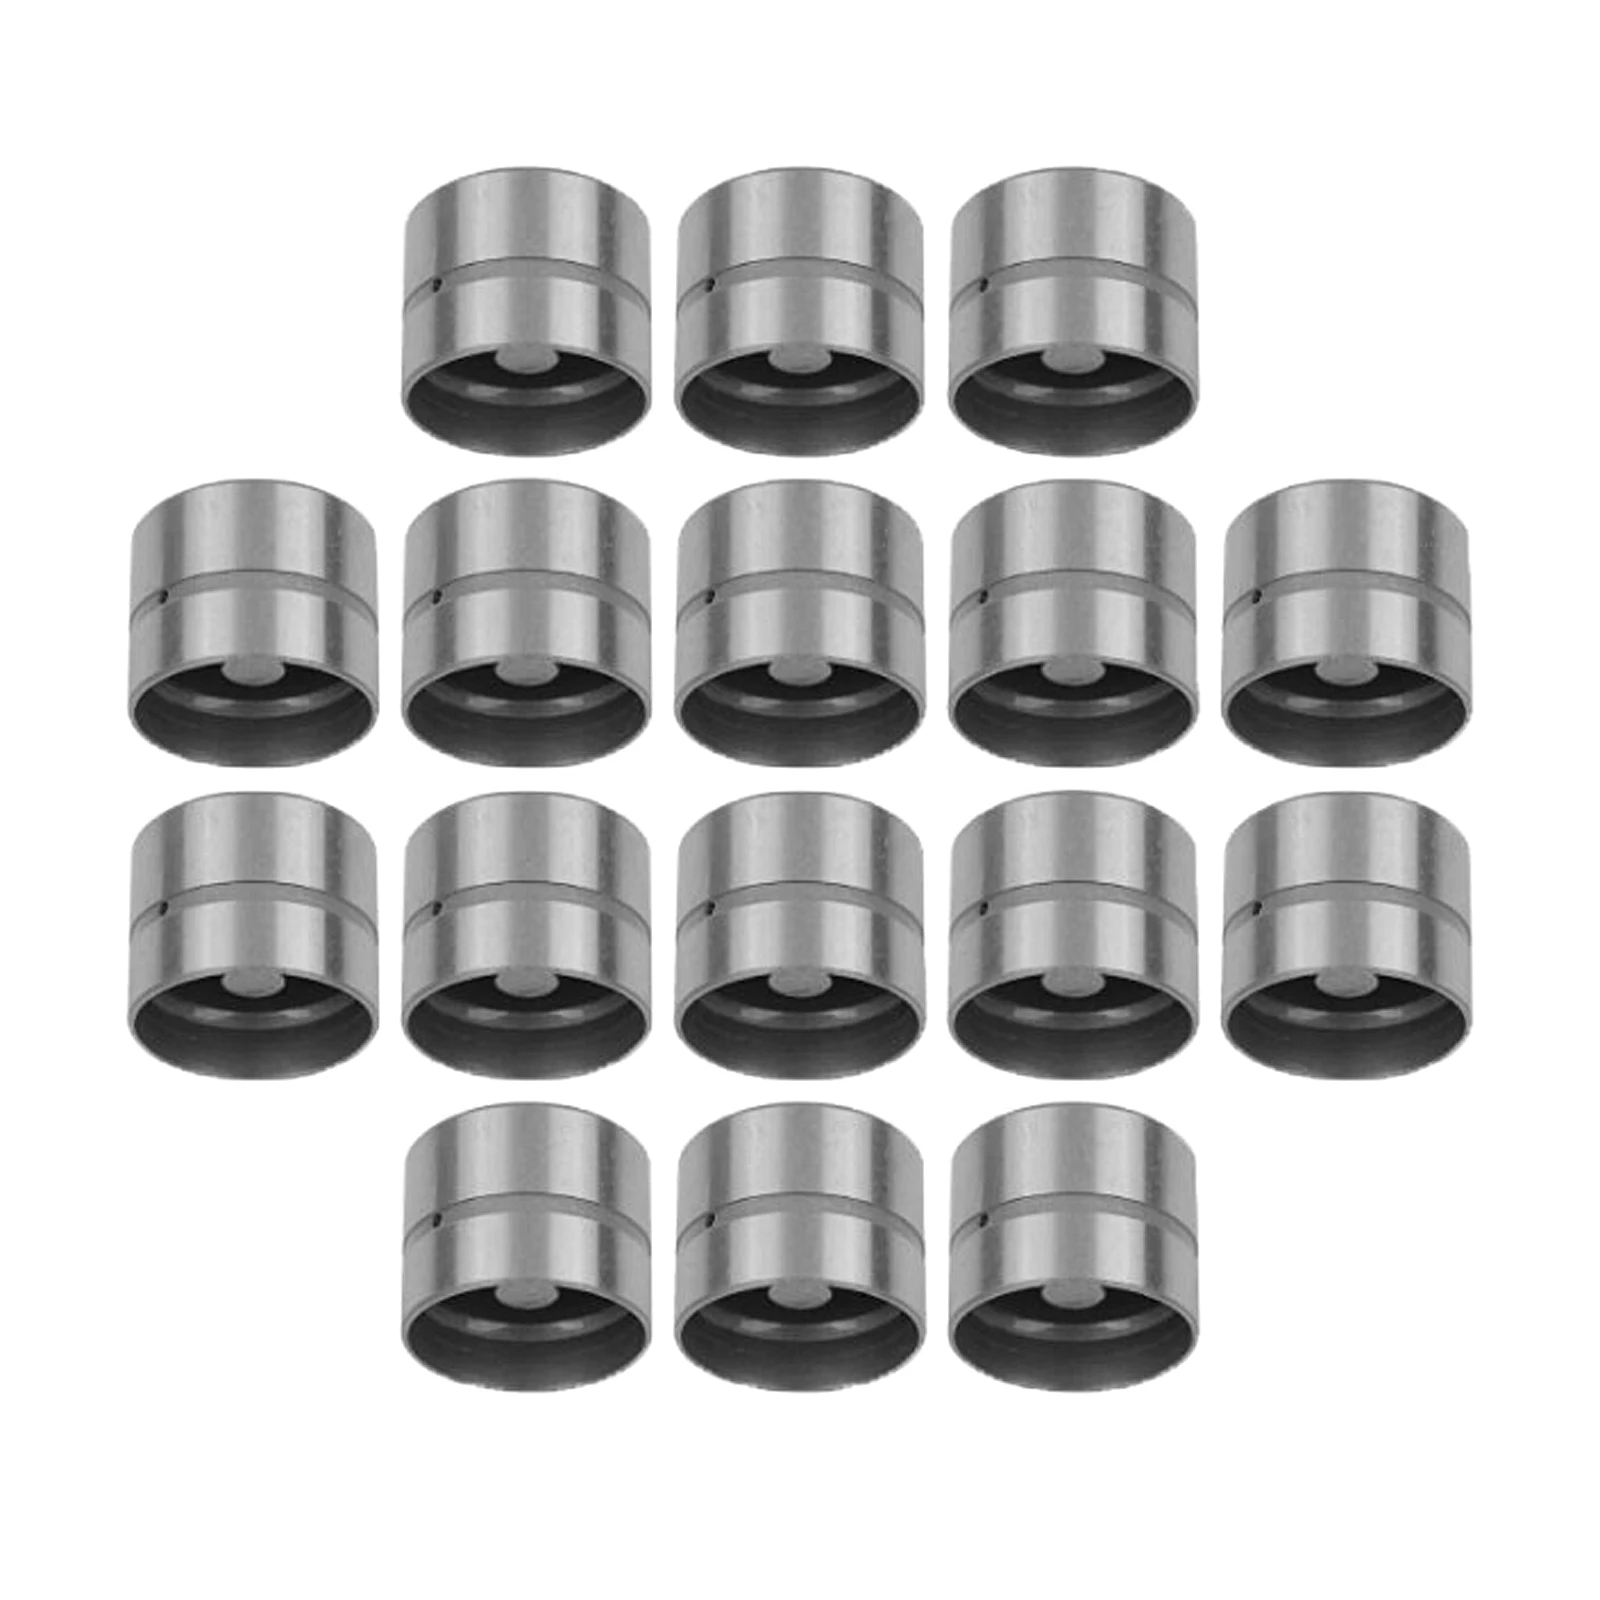 16 Pieces Hydraulic Tappets Replaces 420011810 for C20XE C20LET X20XEV C18XEL X16XEL Z14XE Components